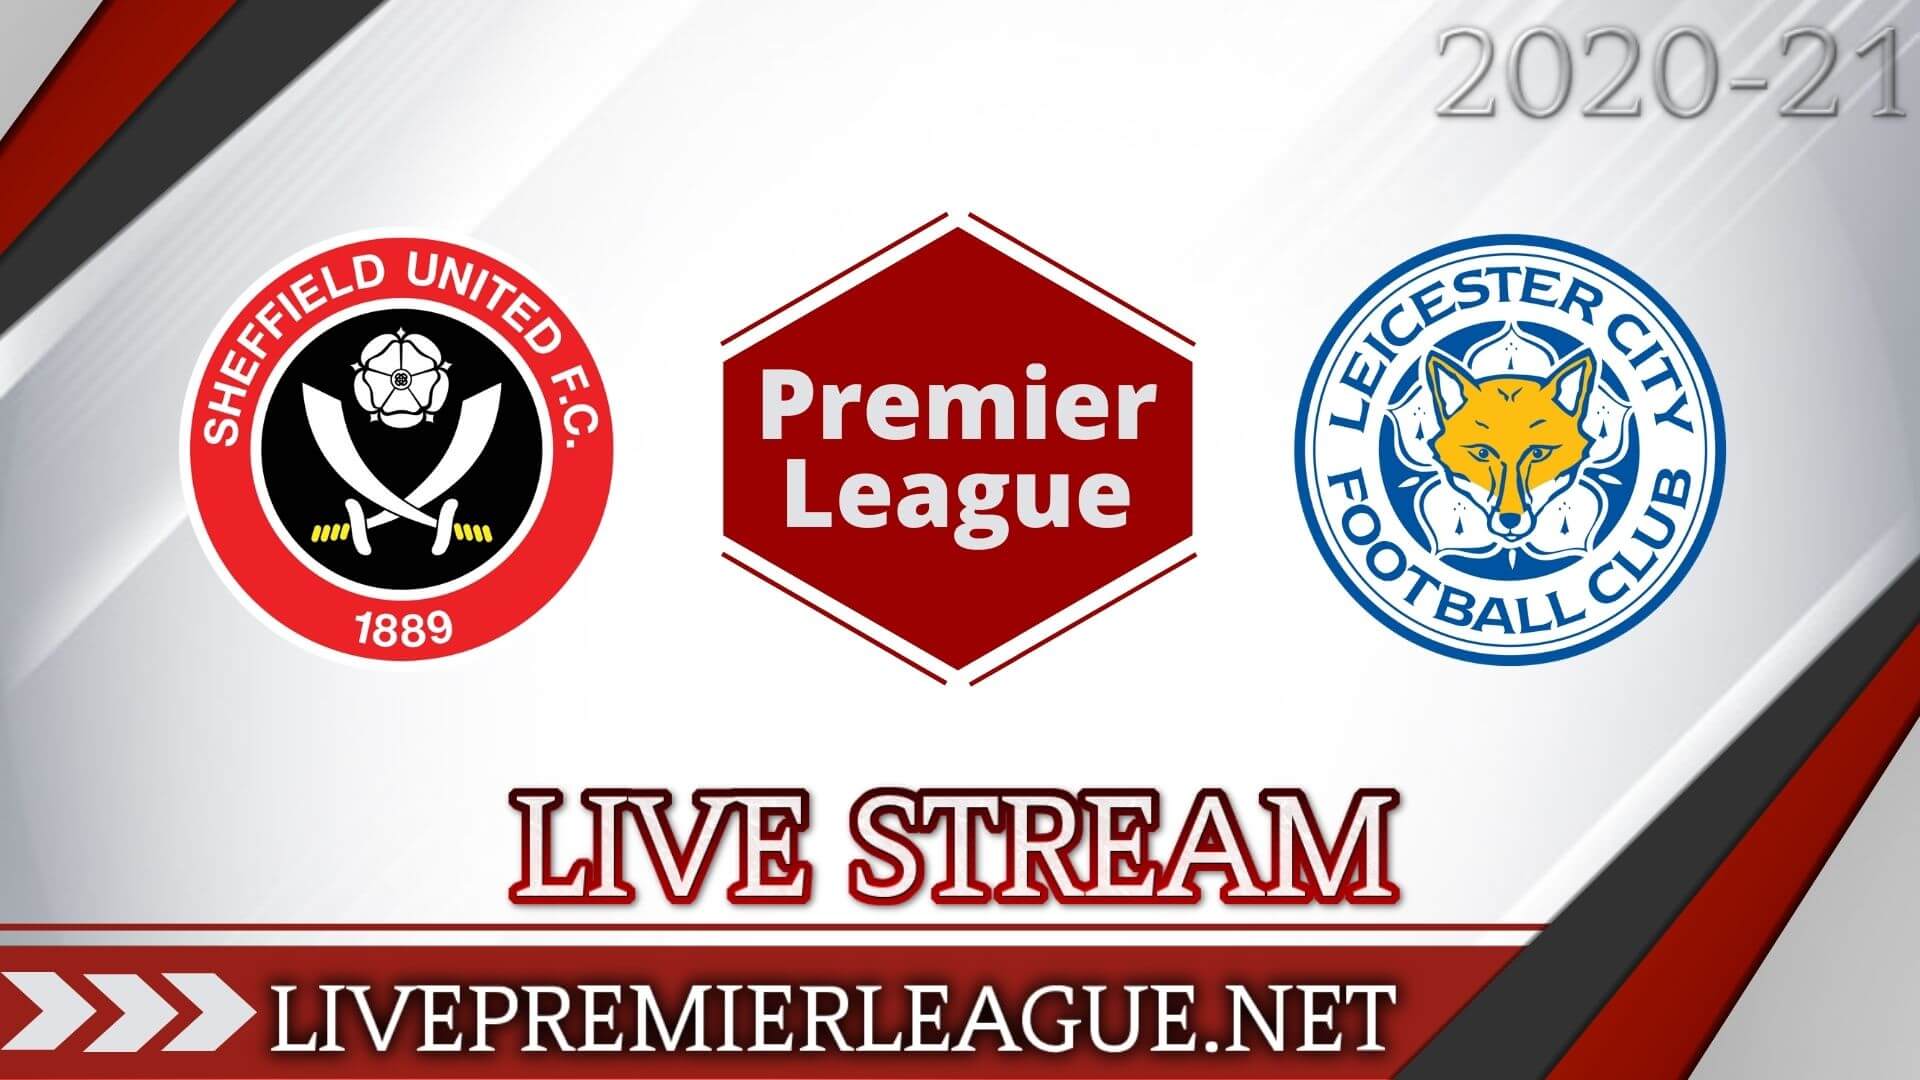 Sheffield United Vs Leicester City Live Stream 2020 | Week 11